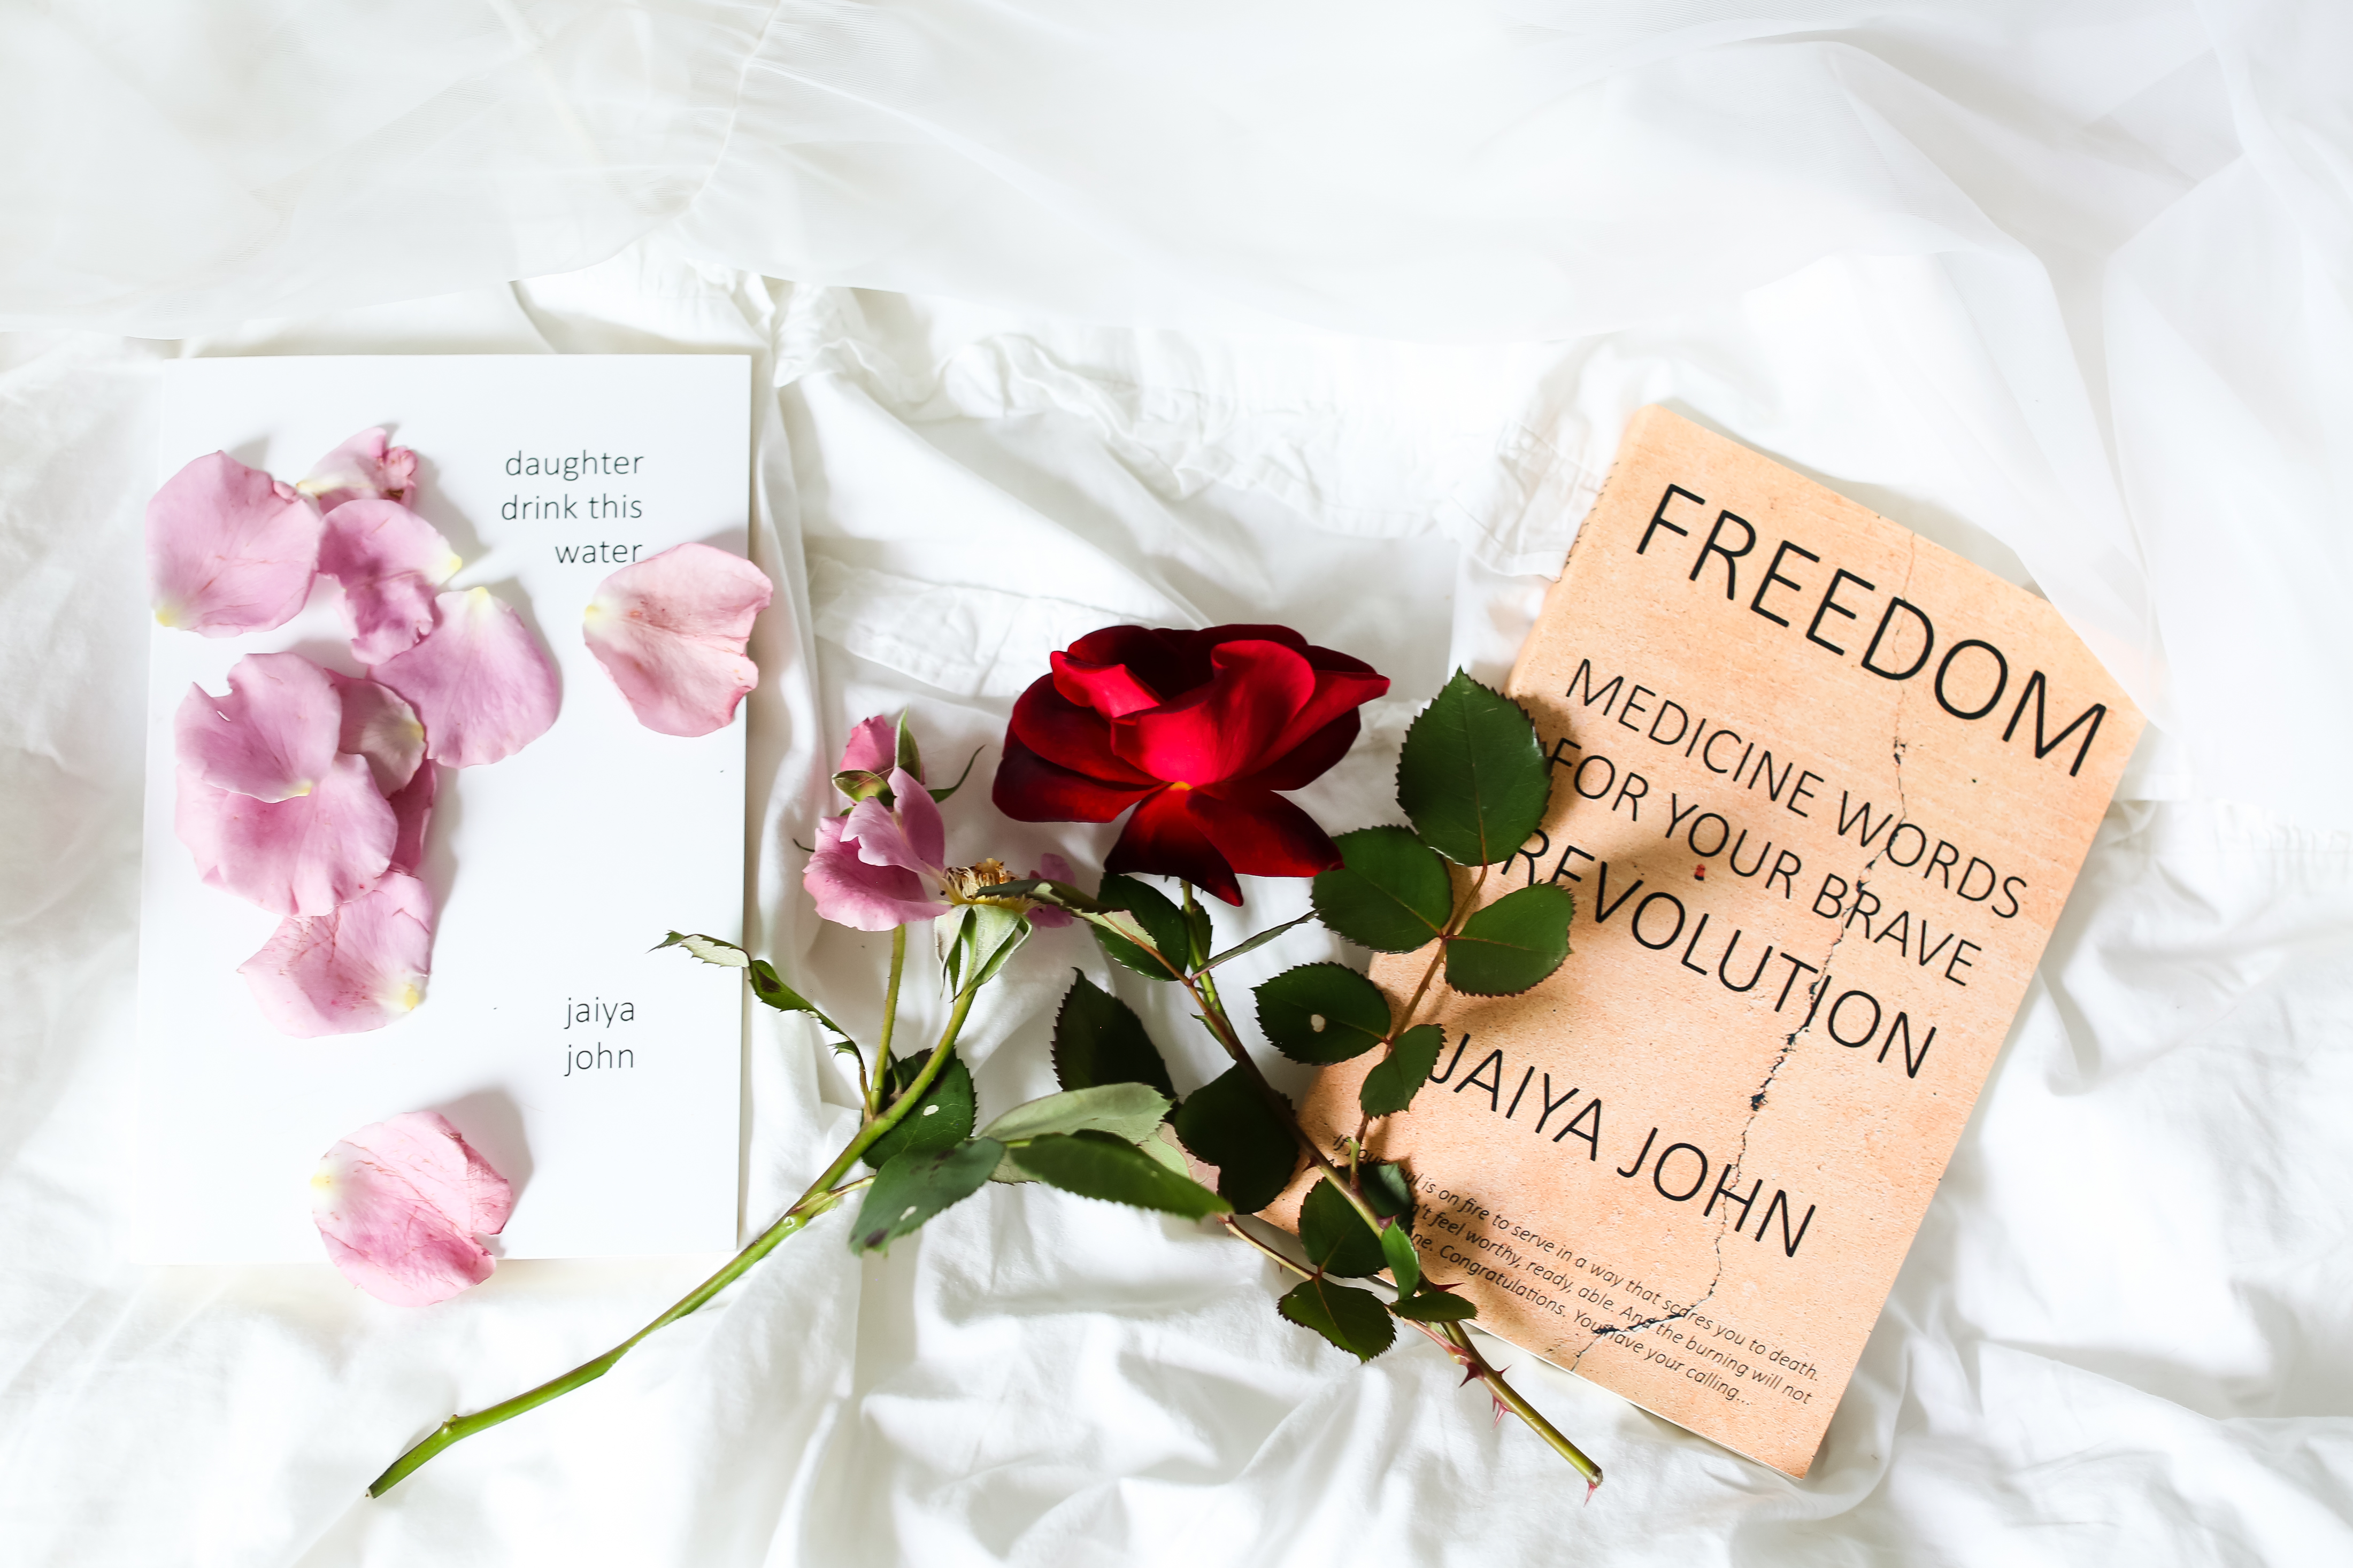 Two books with red rose and pink flower